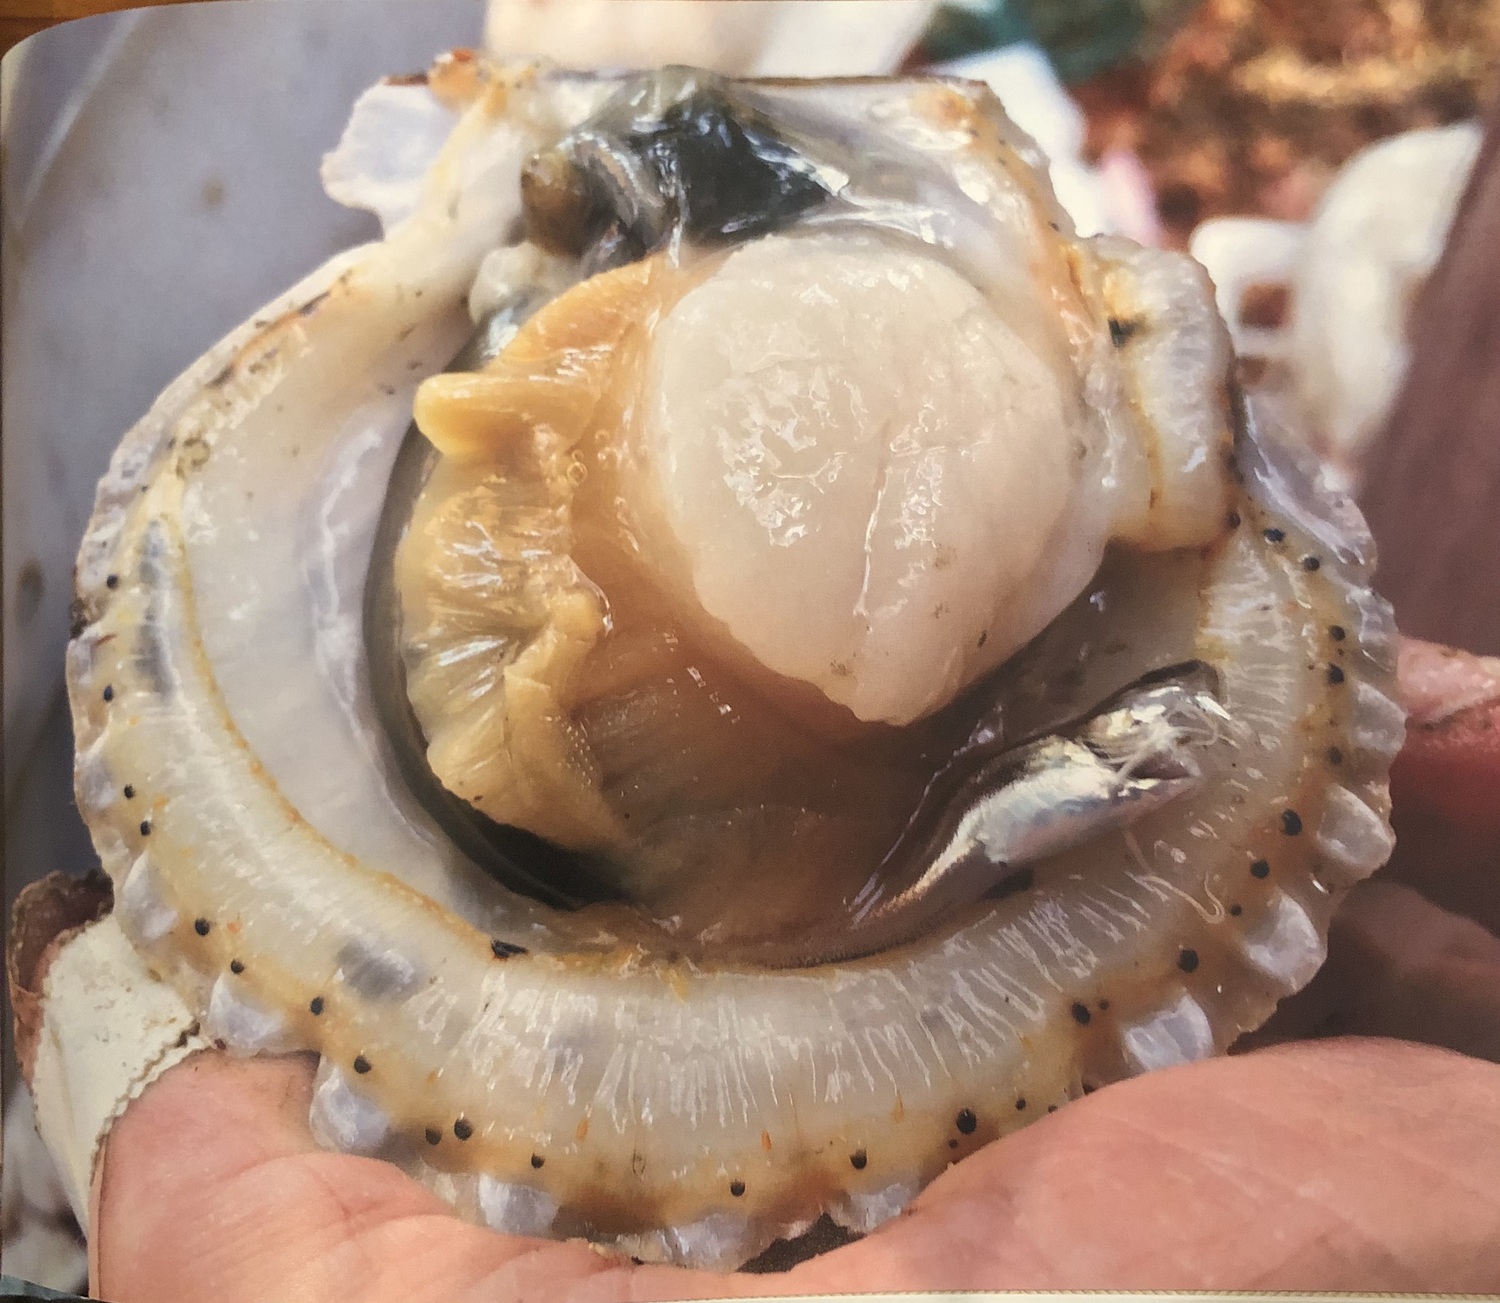 It's been another lackluster season for scallops.